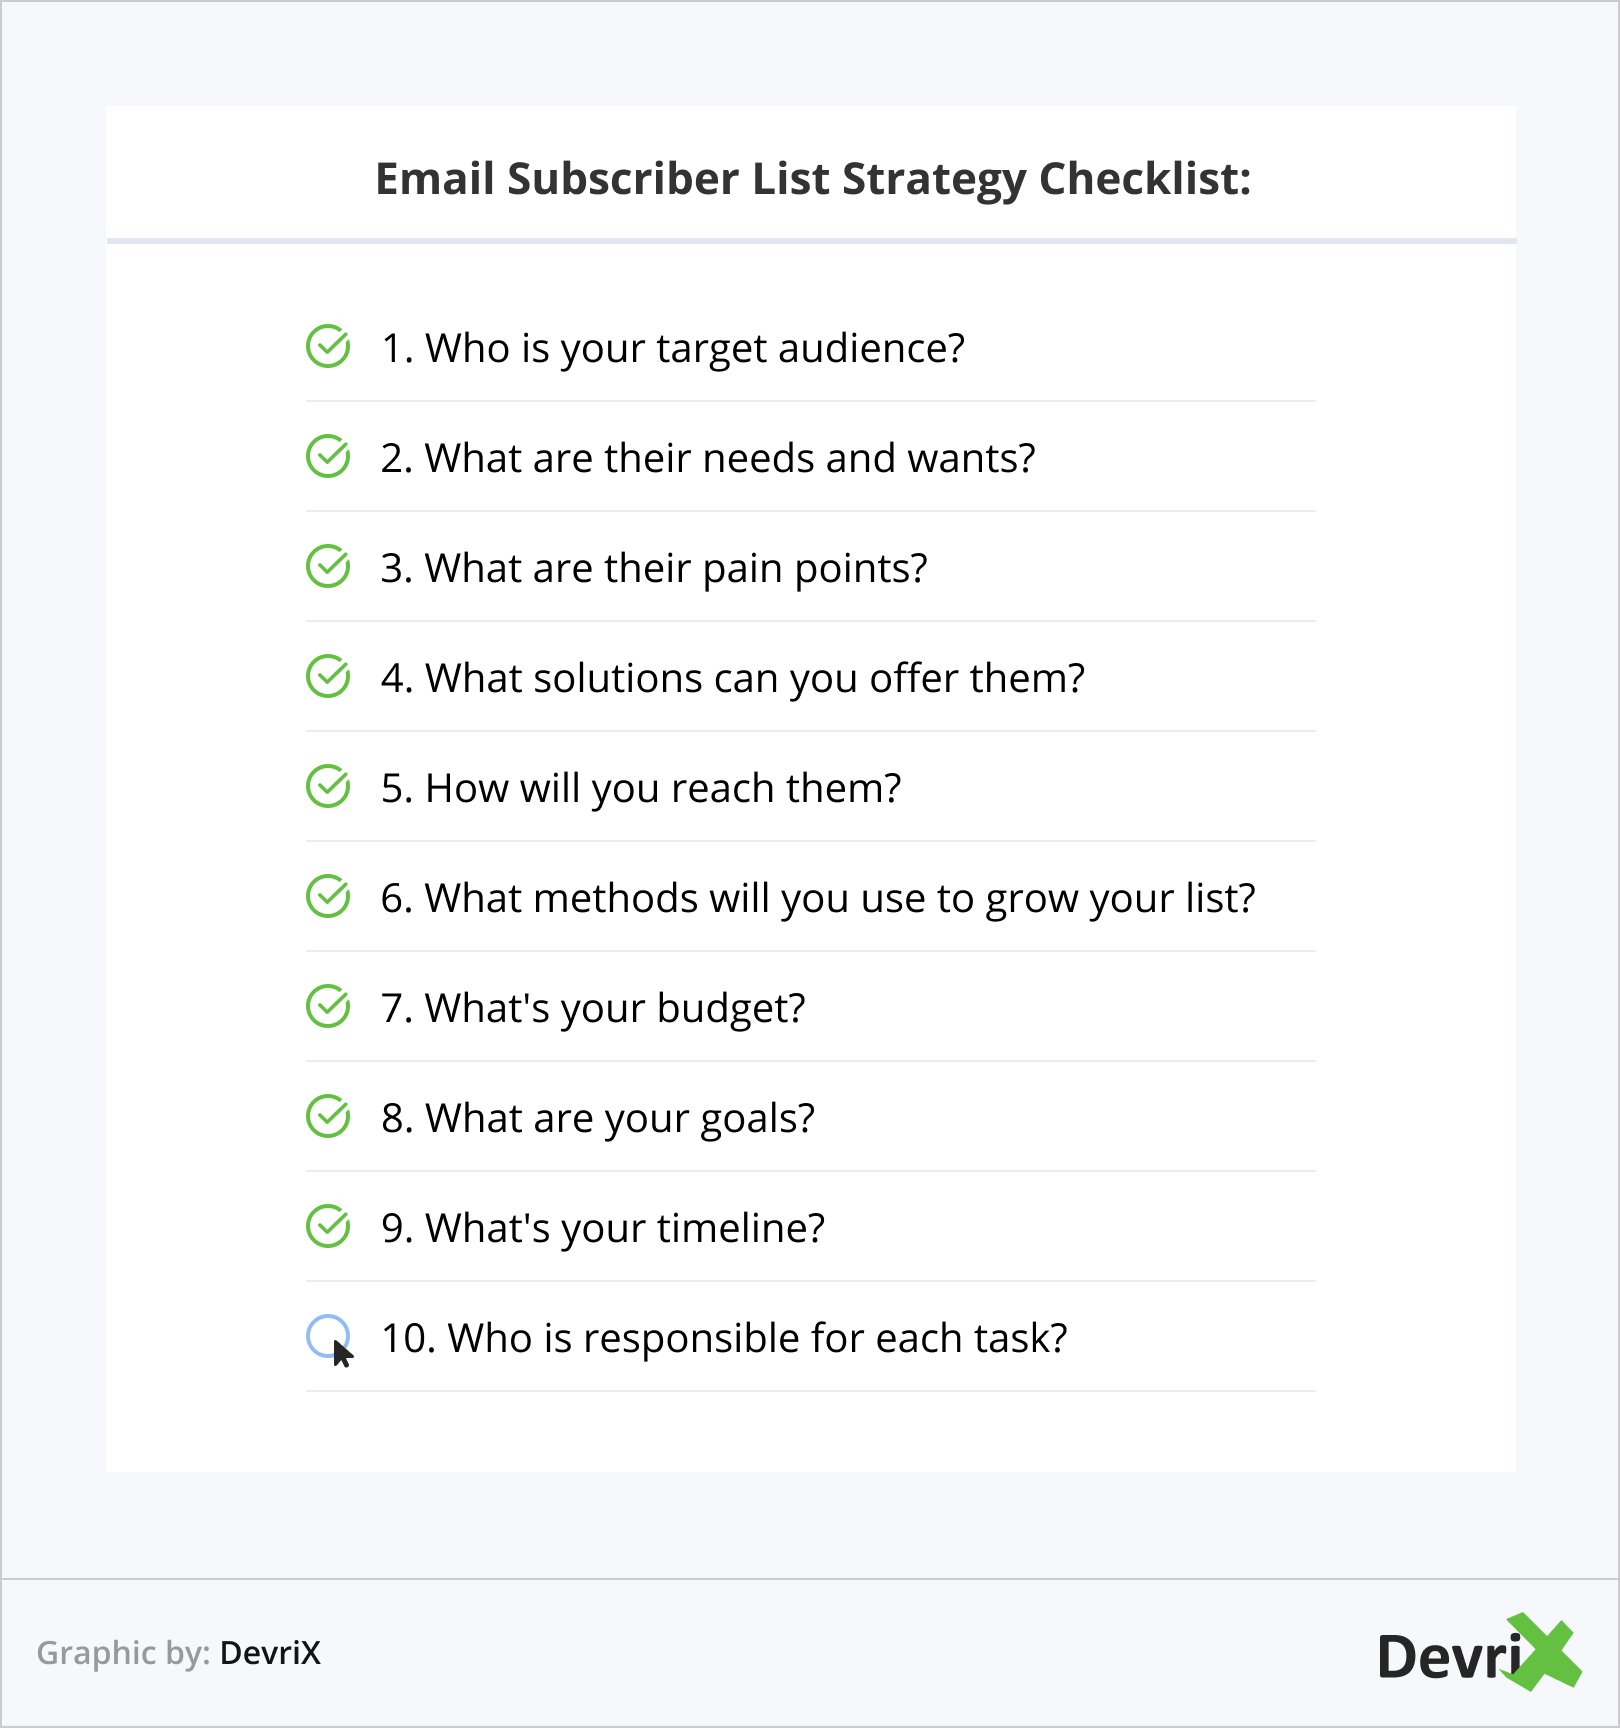 Email Subscriber List Strategy Checklist